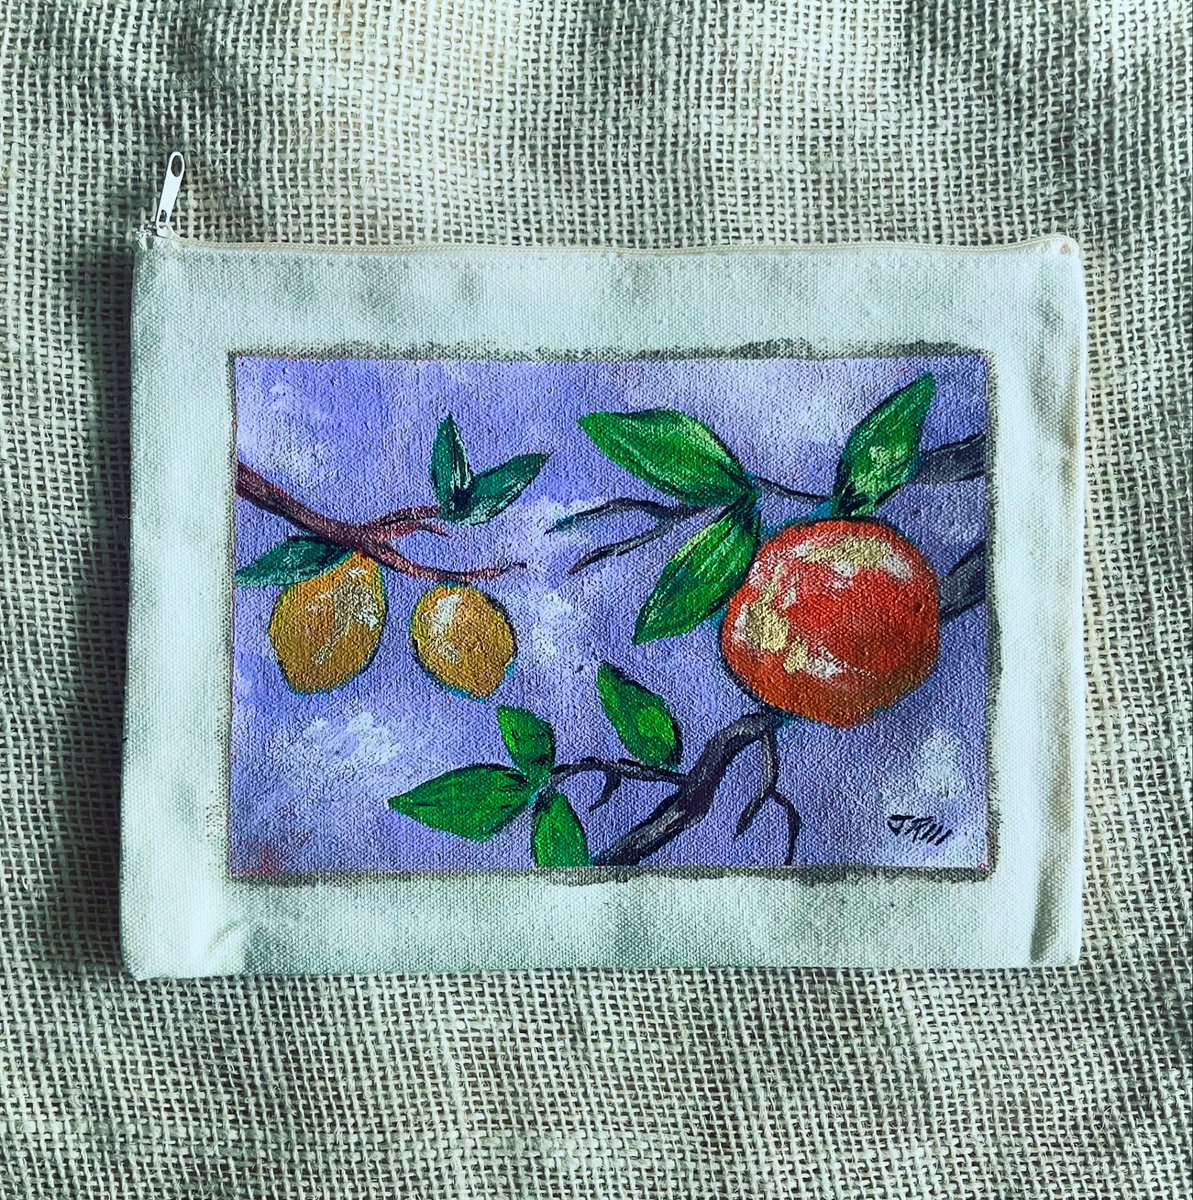 Oranges 🍊 or lemons 🍋! lol , they will be added to my shop soon. Link to shop in Bio #art #artist #arts #artistsoninstagram #artgallery #craft #painting #paintings #painter #artoftheday #lemon #foodart #impressionism #pouch #pouches #canvas #canvaspainting #canvasart